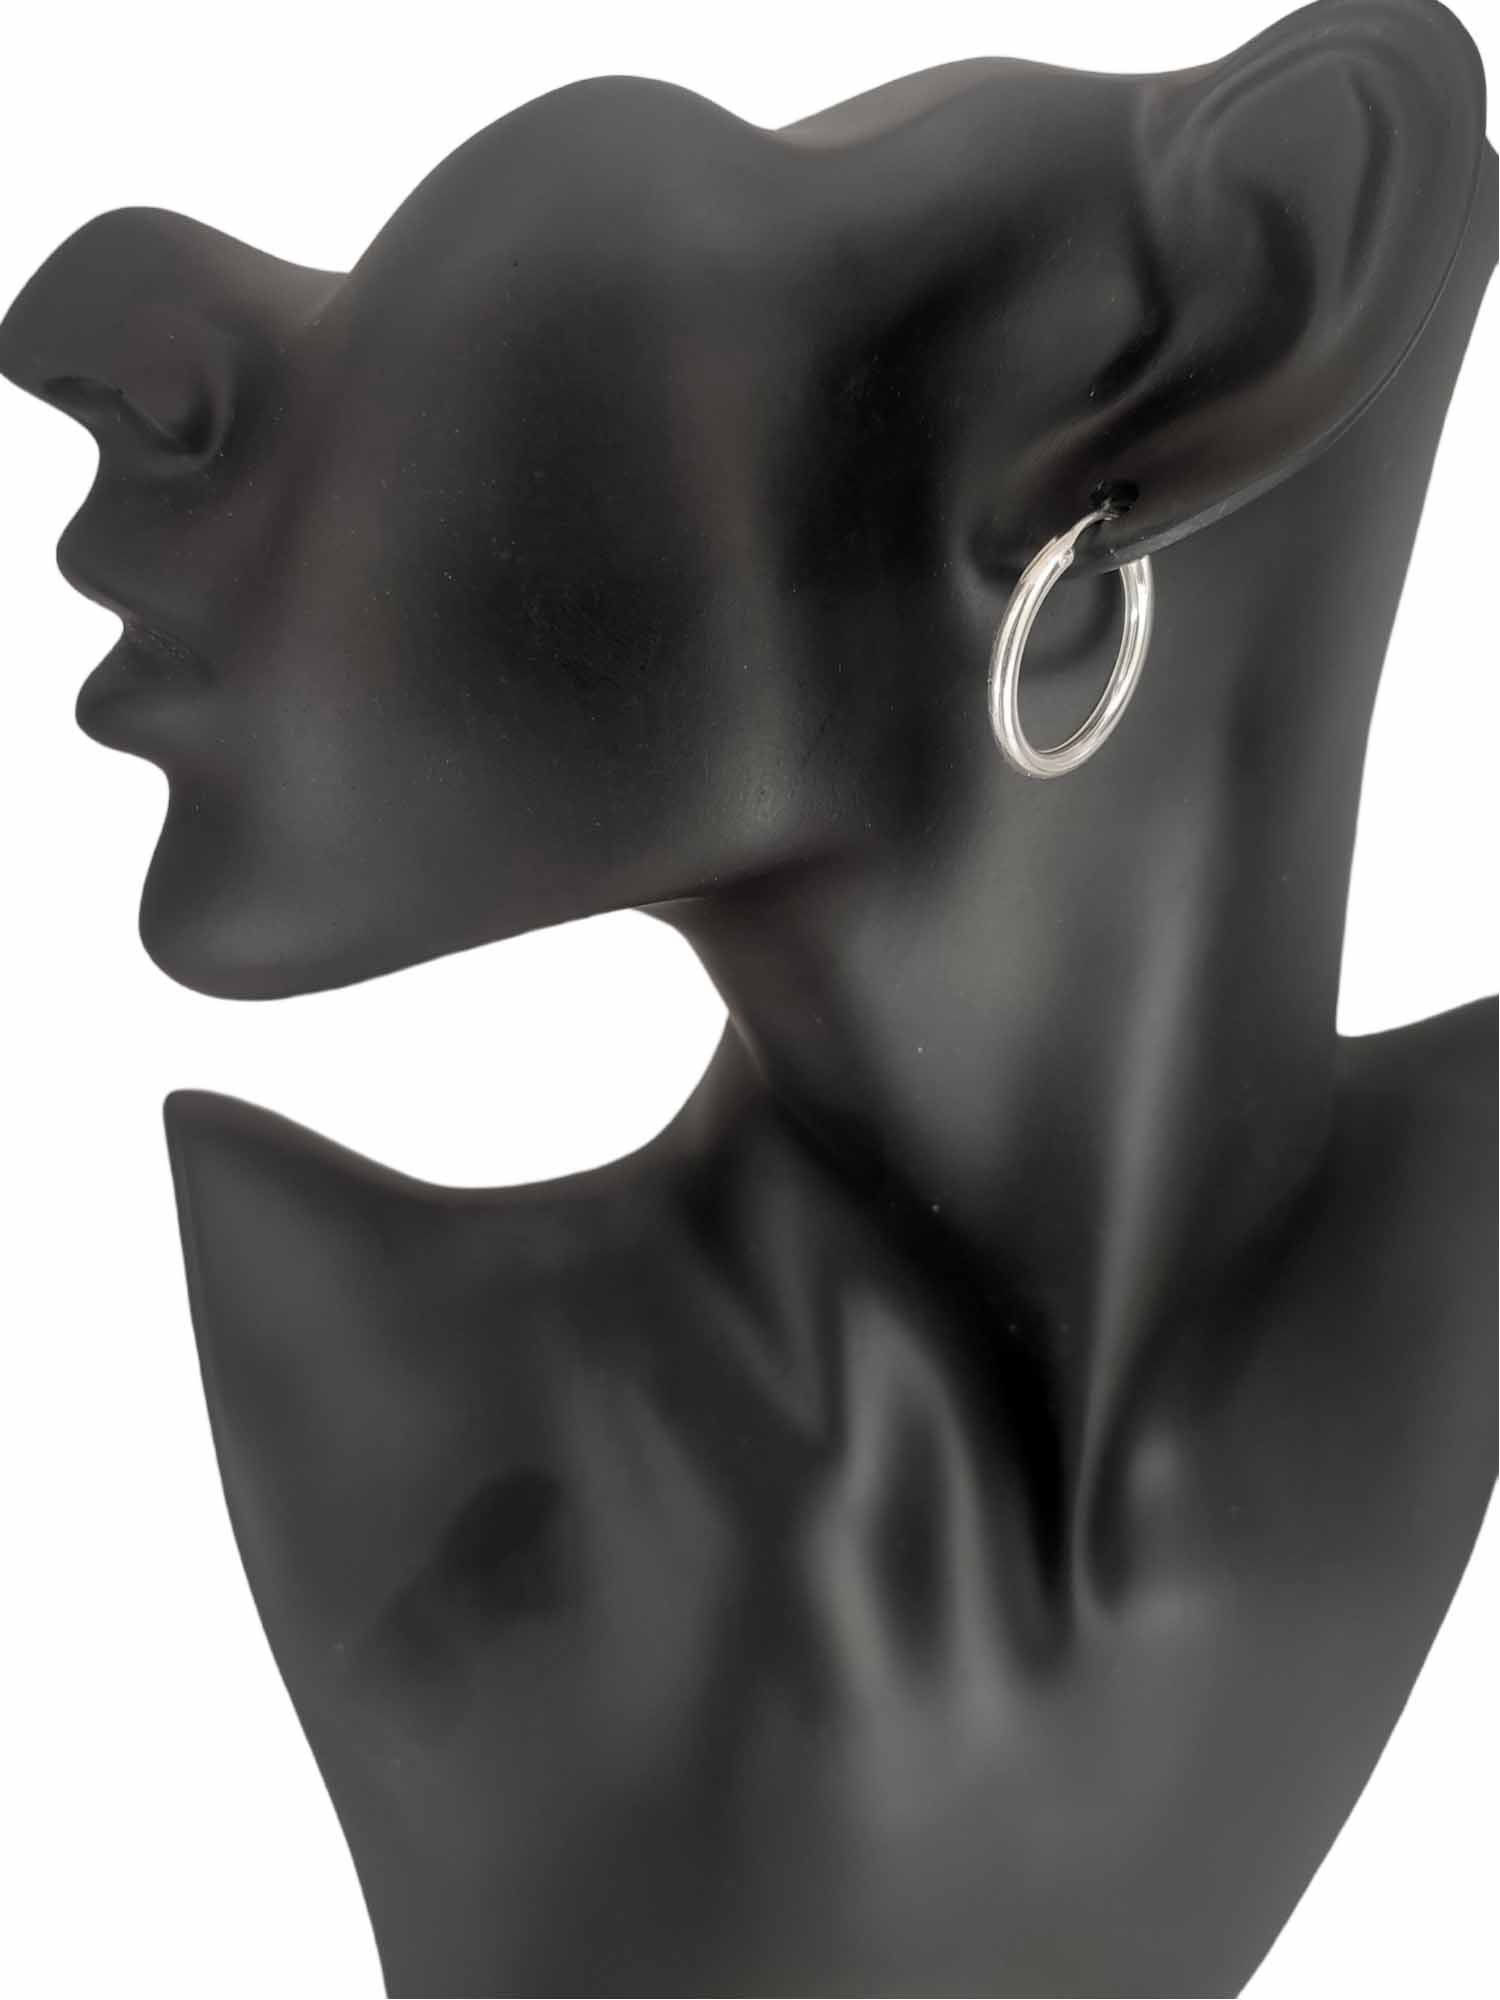 Kiss of Ohrringe Sterling Paarpreis Ohrring-Set Ohr Leather Kreole Silber Schlicht 925 Creole